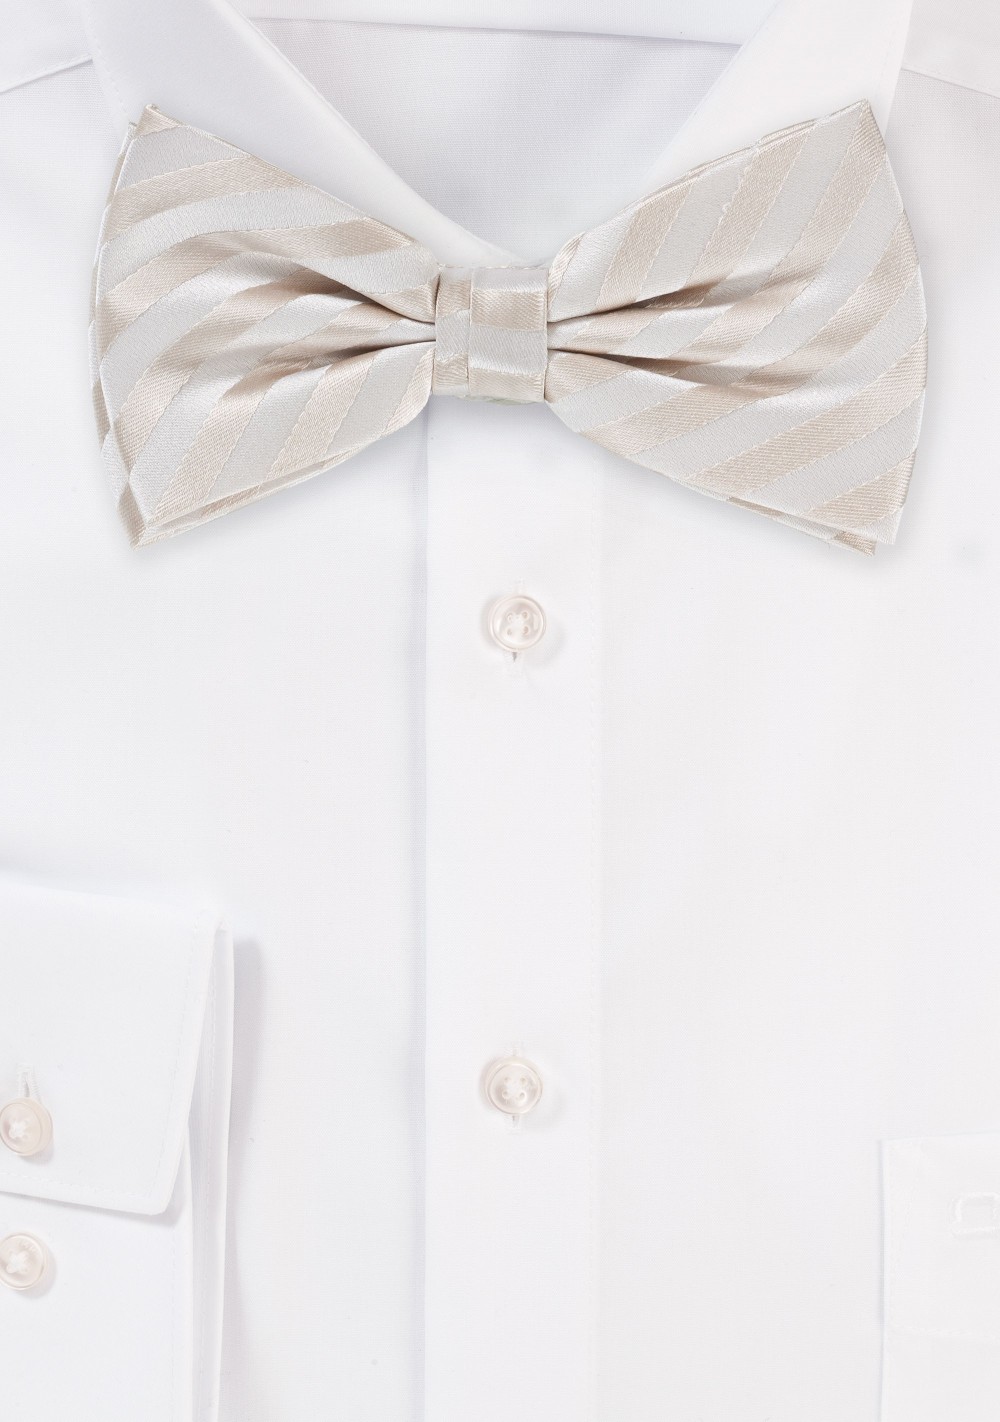 Formal Ivory Bow Tie in Pre Tied Style